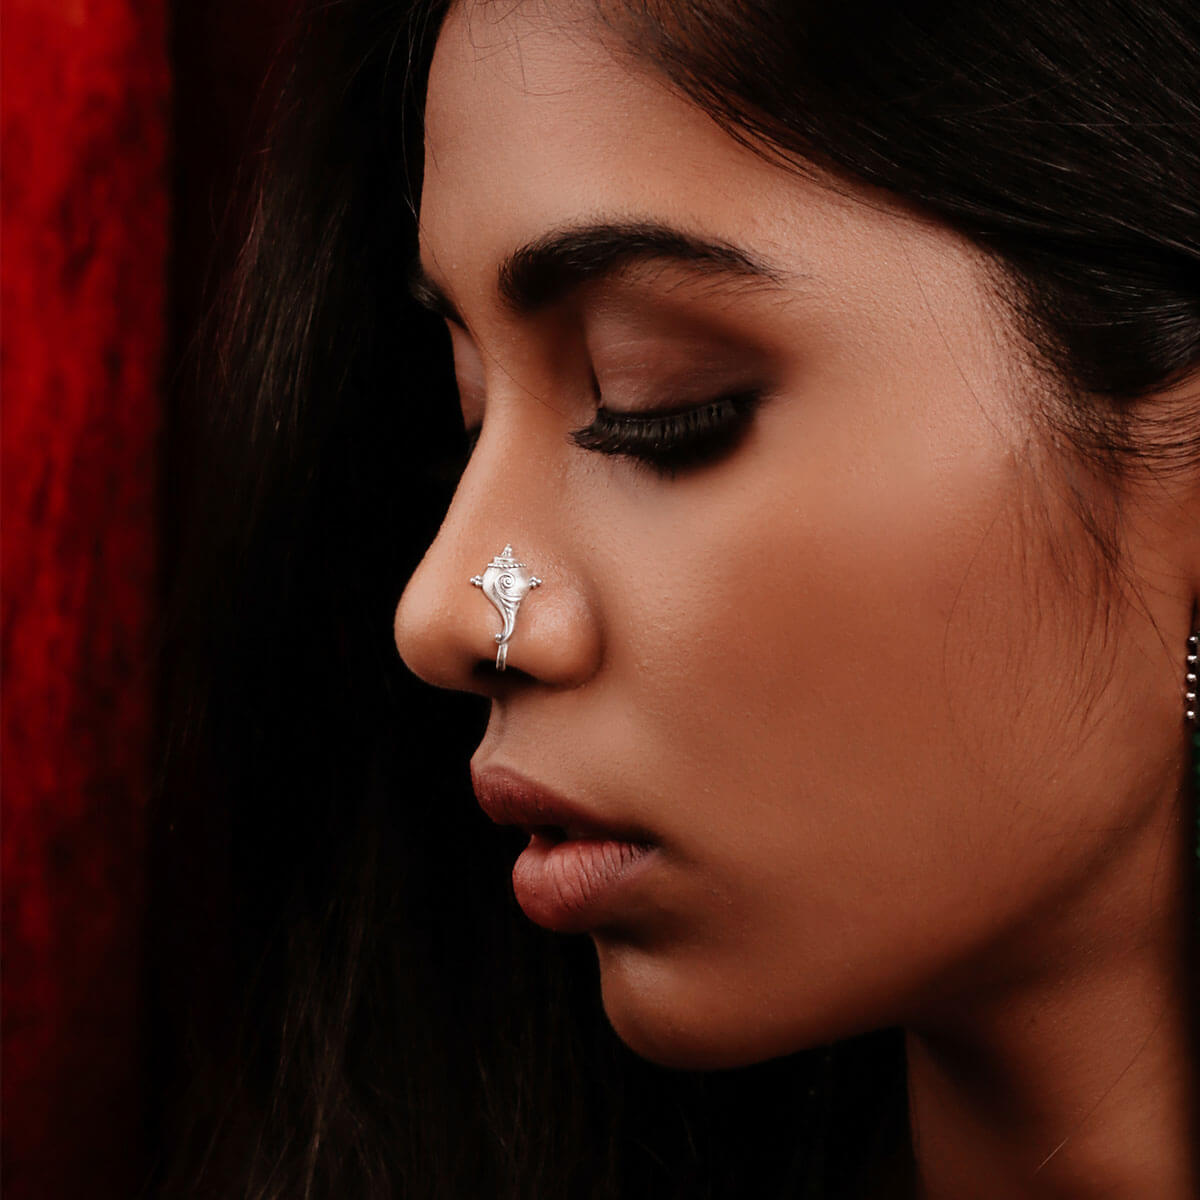 Amazon.com: Silver Nose Ring, Indian Style Asymmetric 925 Sterling Silver  Nose Hoop, Fits Cartilage, Helix, Tragus Earring, Handmade Piercing Jewelry,  20g-21g : Handmade Products